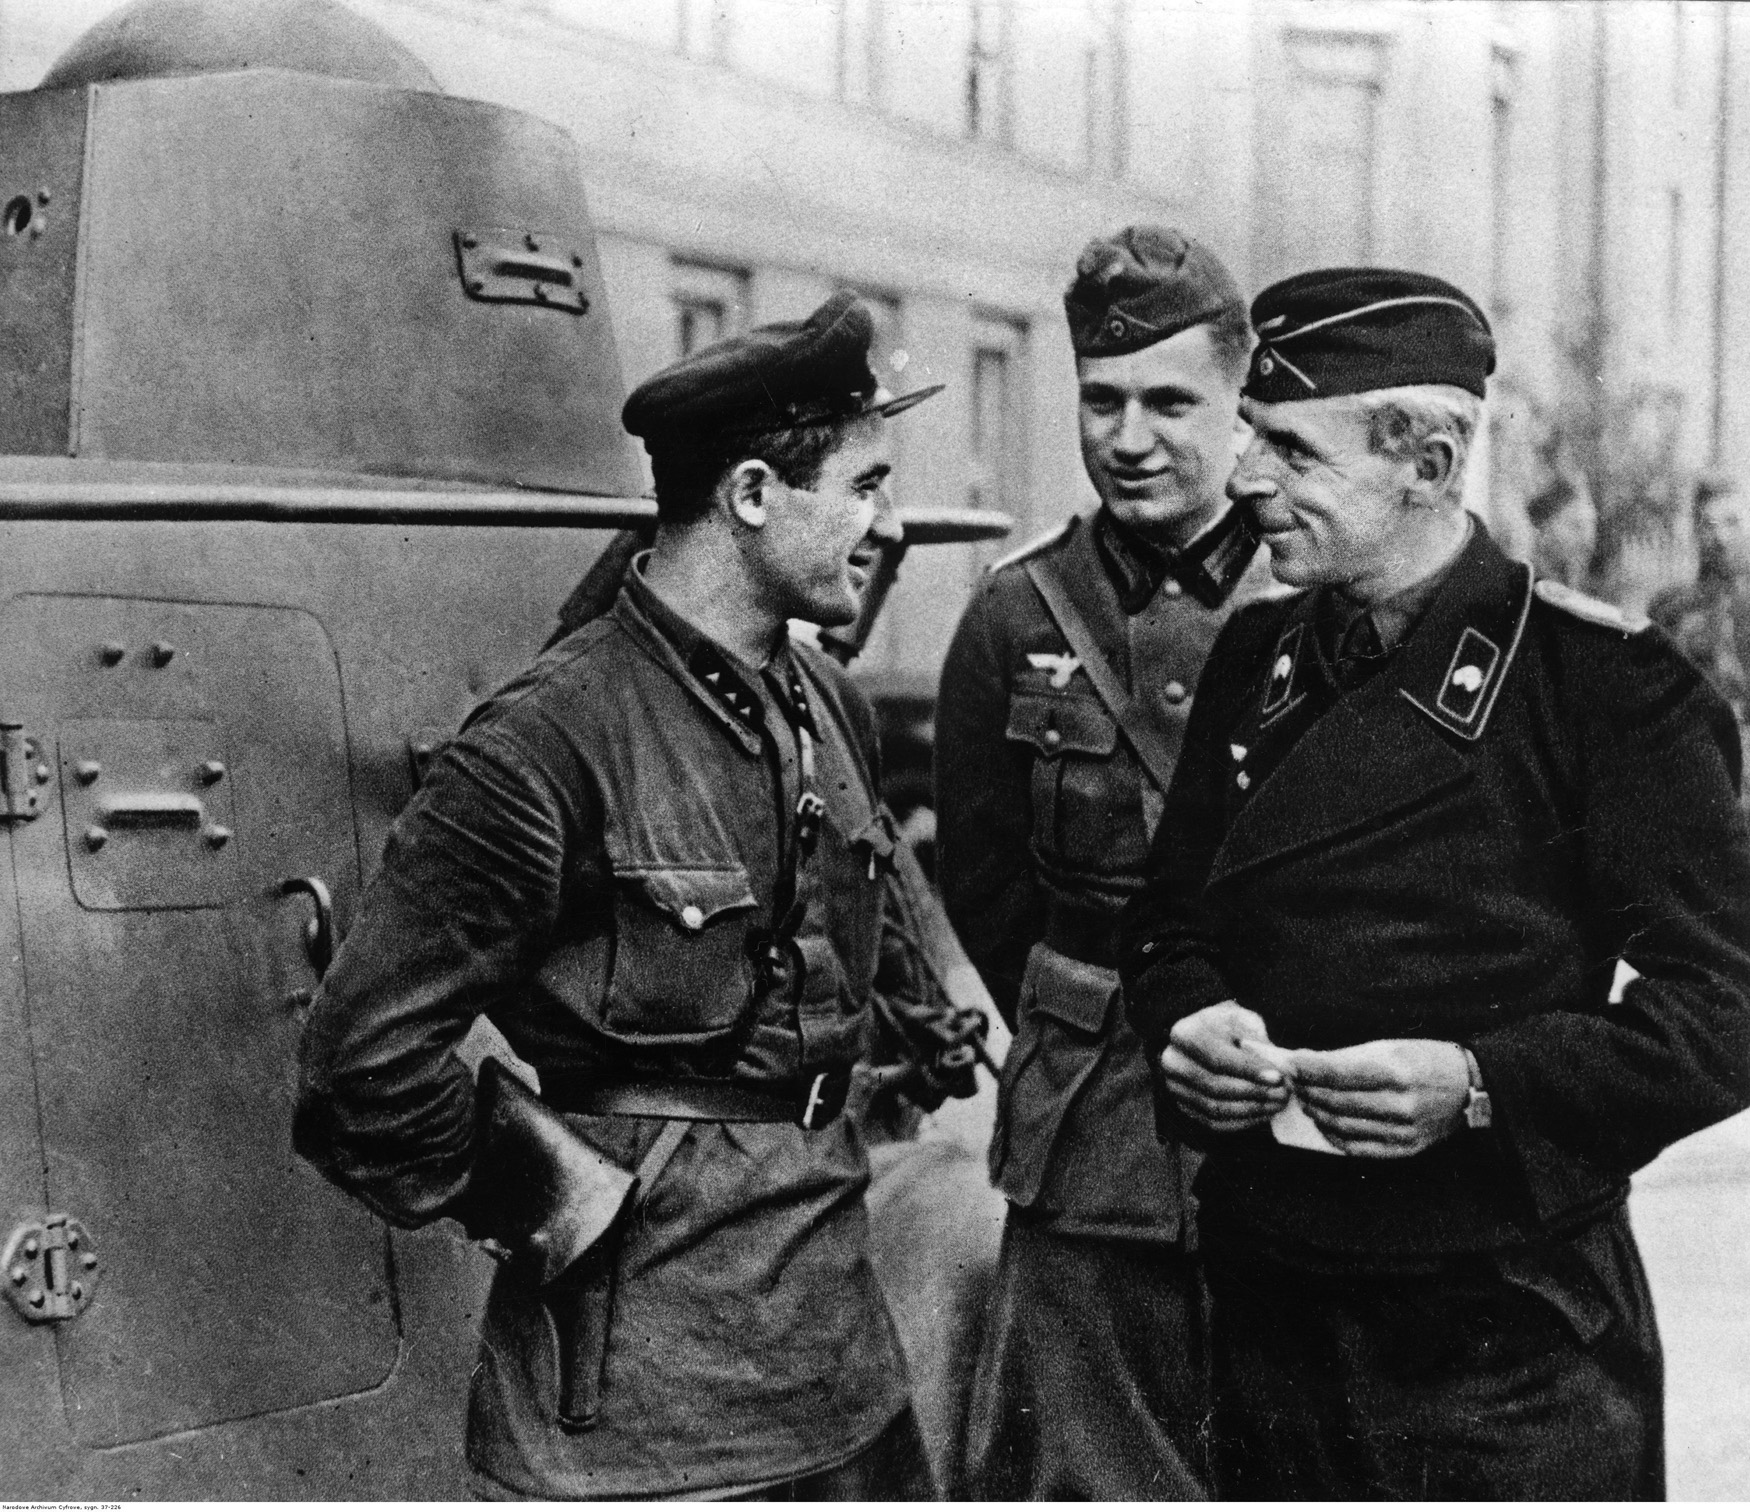 After their marauding columns have achieved their objectives and halted, German soldiers engage a Red Army soldier in conversation in the city of Brest-Litovsk. The city held historical significance for both Germany and the Soviet Union, as it was the site of the peace-treaty signing with the Germans that extricated Bolshevik Russia from World War I. 